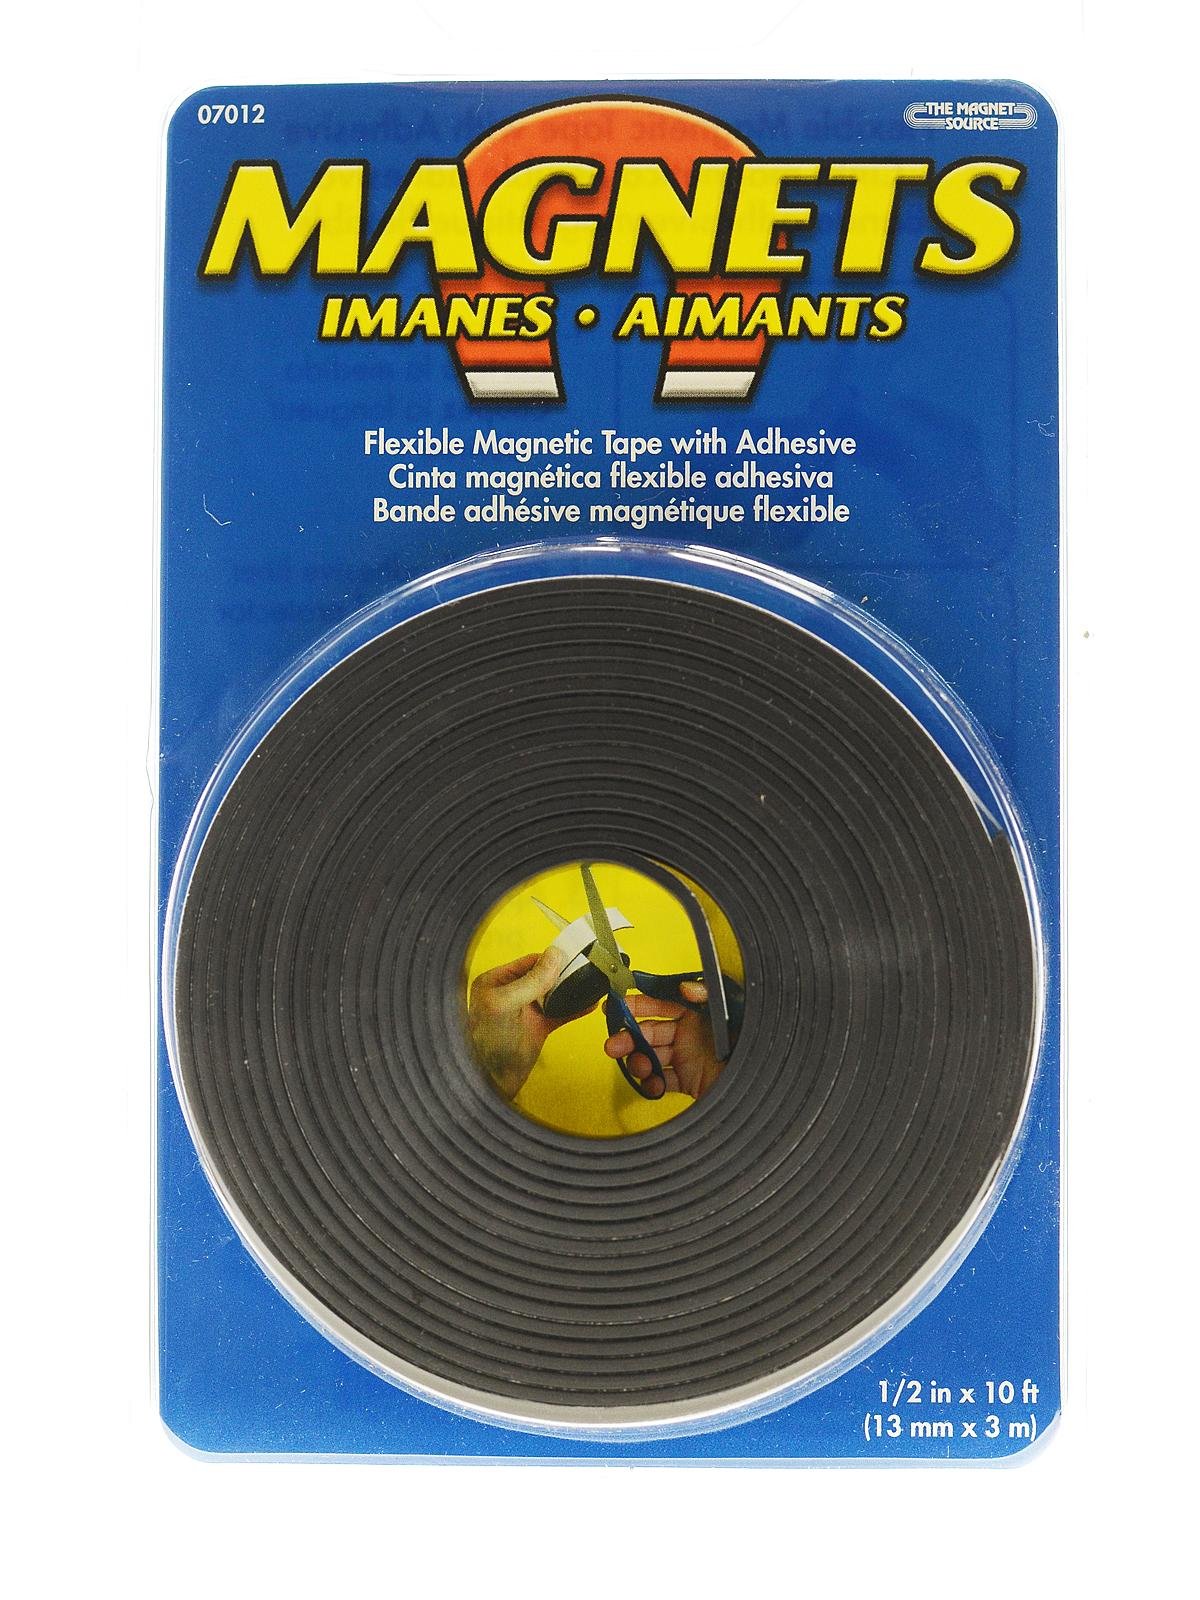 Flexible Magnets – Magnet Store South Africa